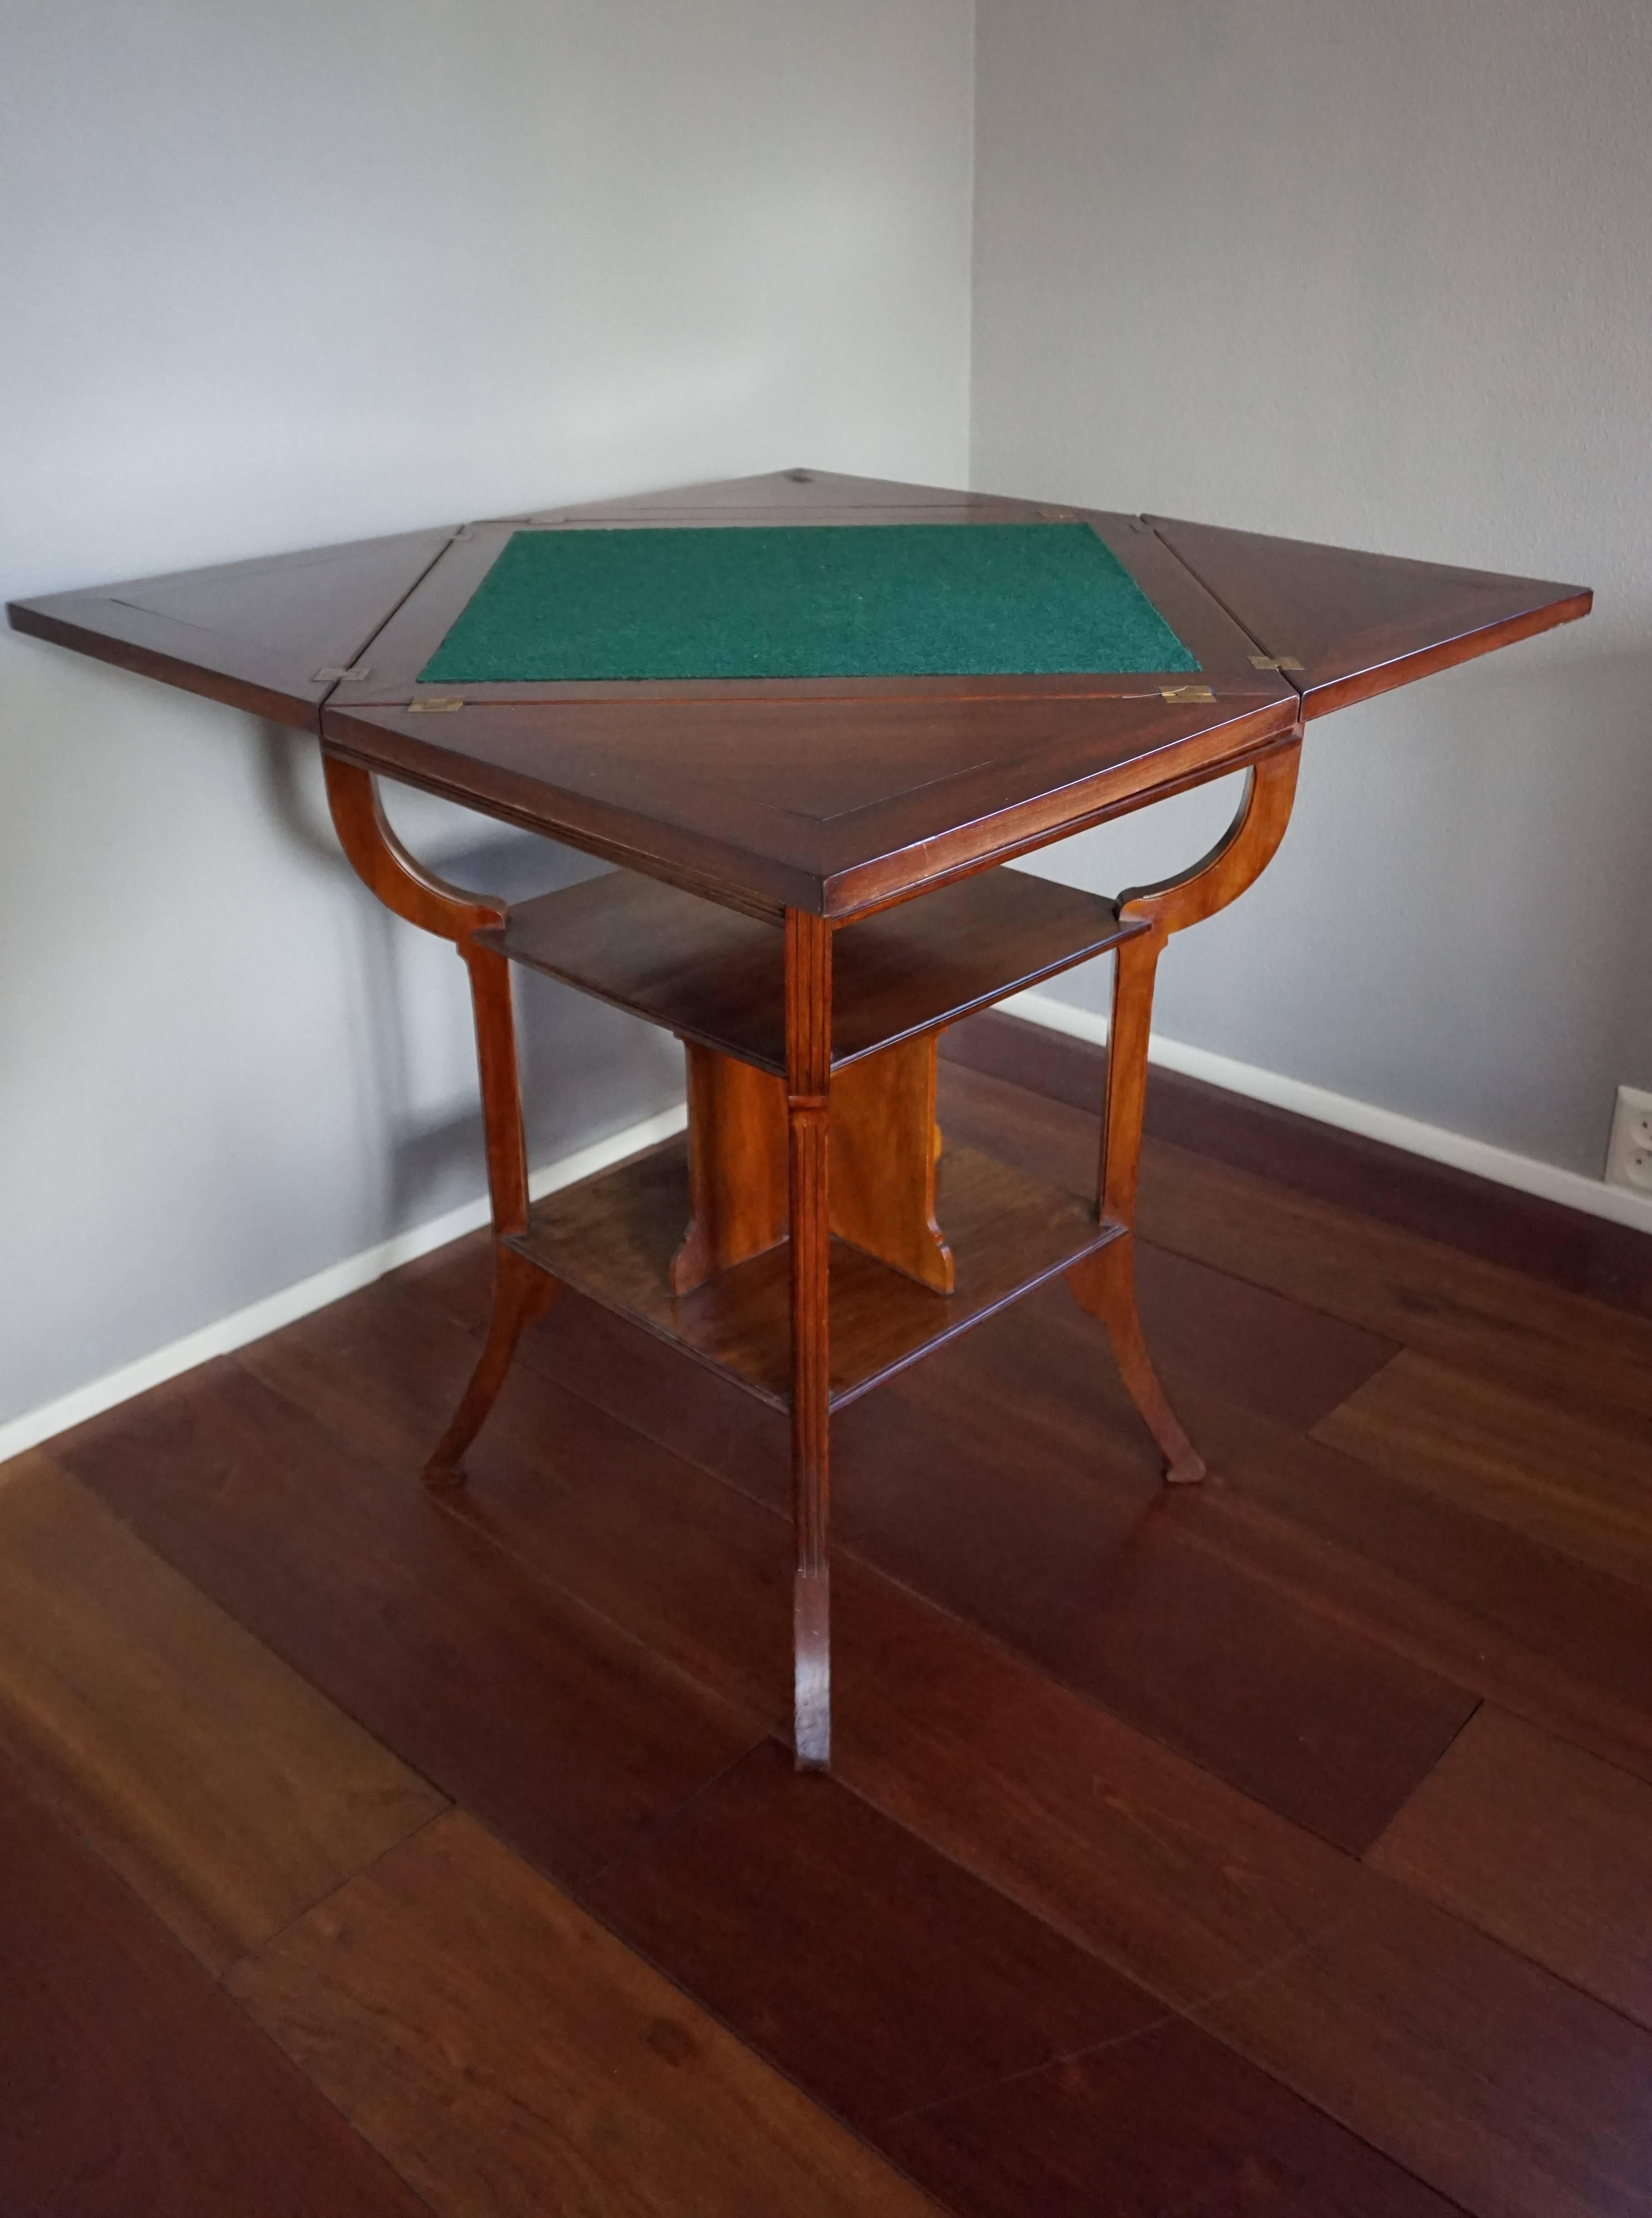 Dutch Jugendstil Mahogany Cards/Games Table with Bookcase by Pander of the Hague